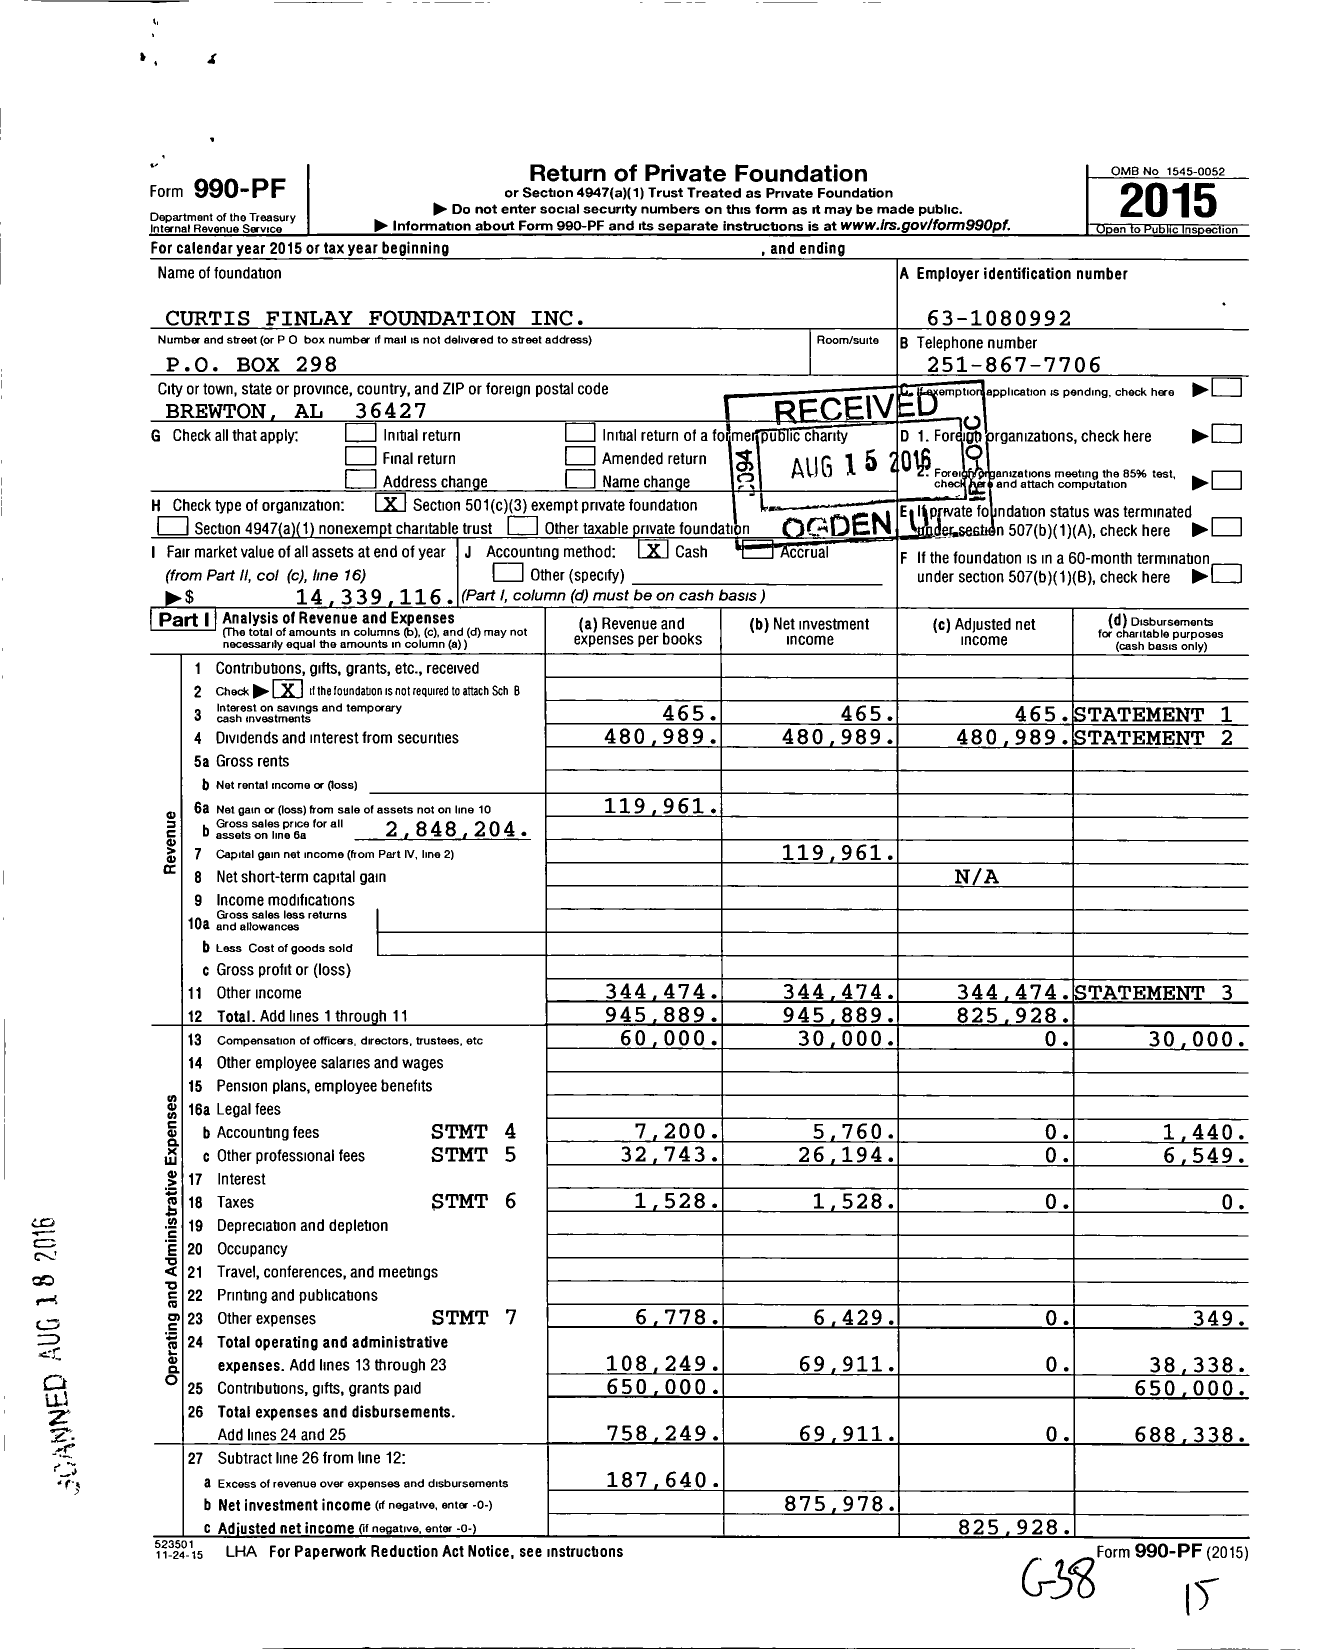 Image of first page of 2015 Form 990PF for Curtis Finlay Foundation